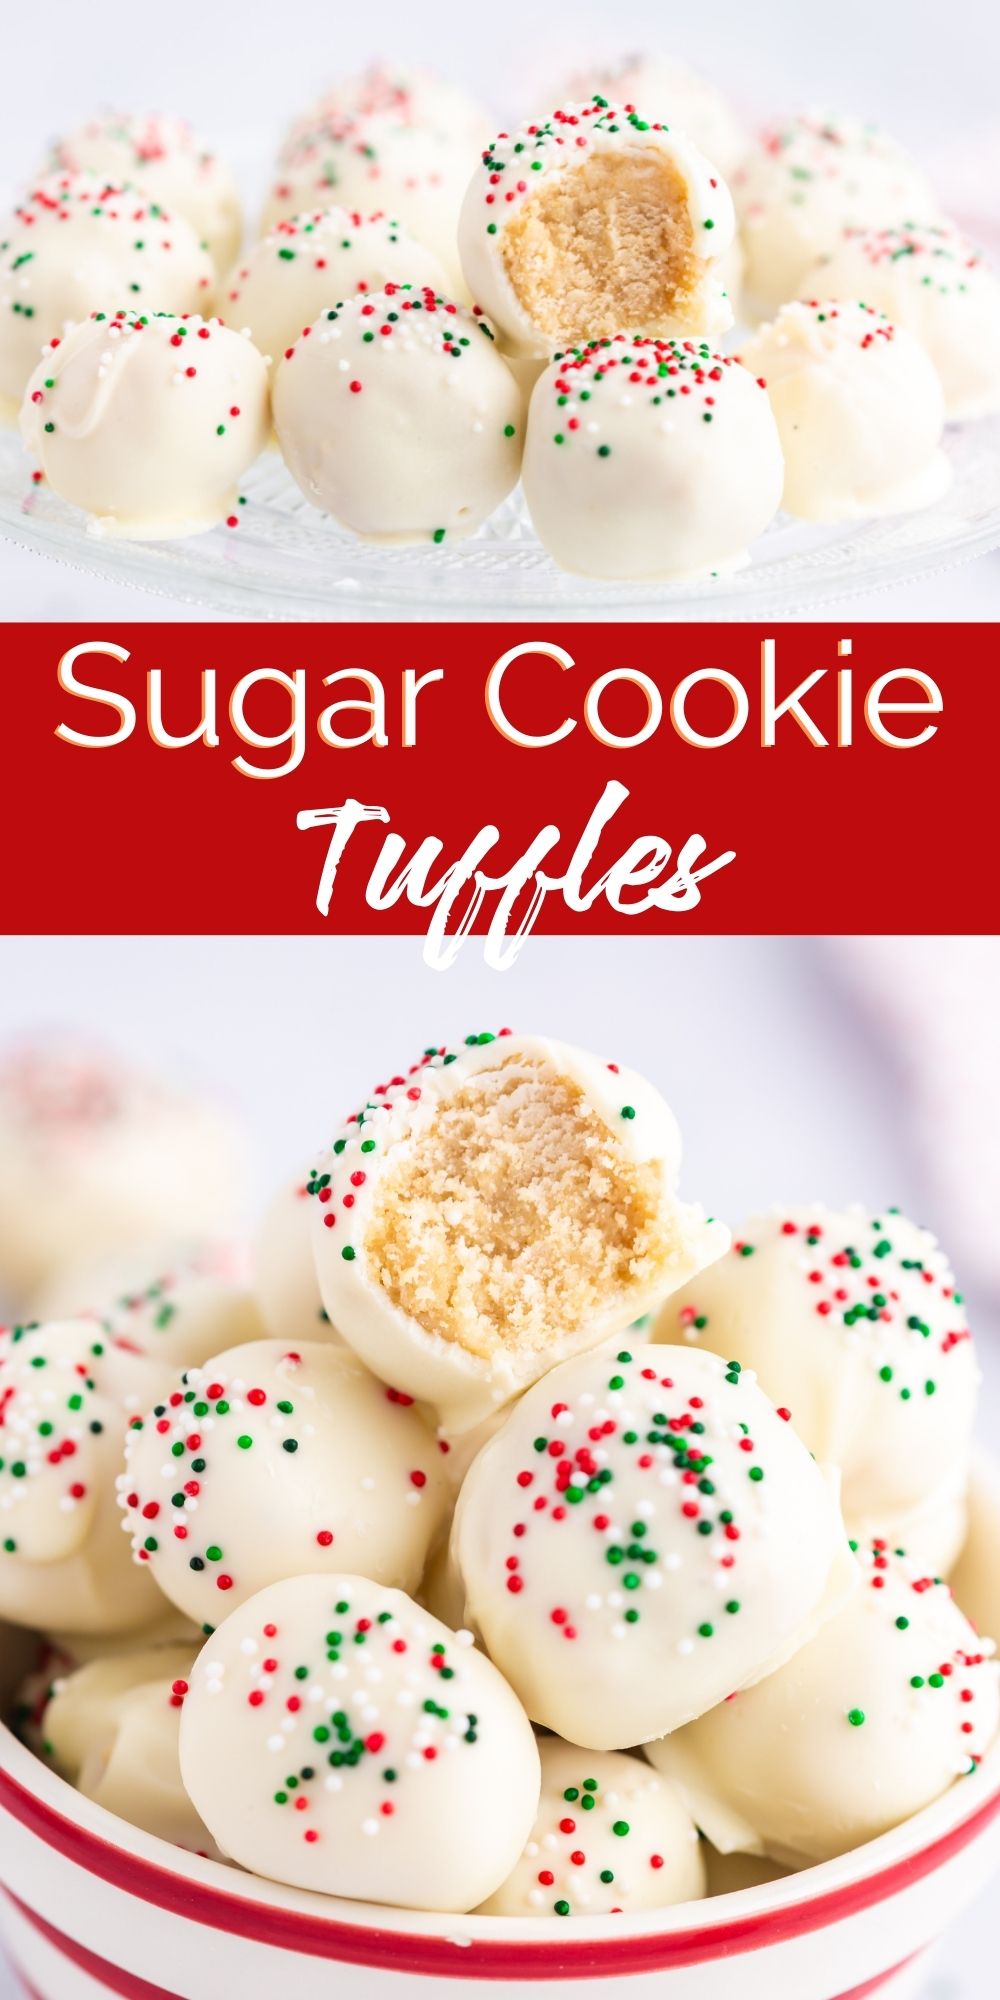 These Sugar Cookie Truffles are a delicious truffle treat made from, you guessed it, sugar cookies. Just dunk them in melted chocolate and top them sprinkles. via @familyfresh